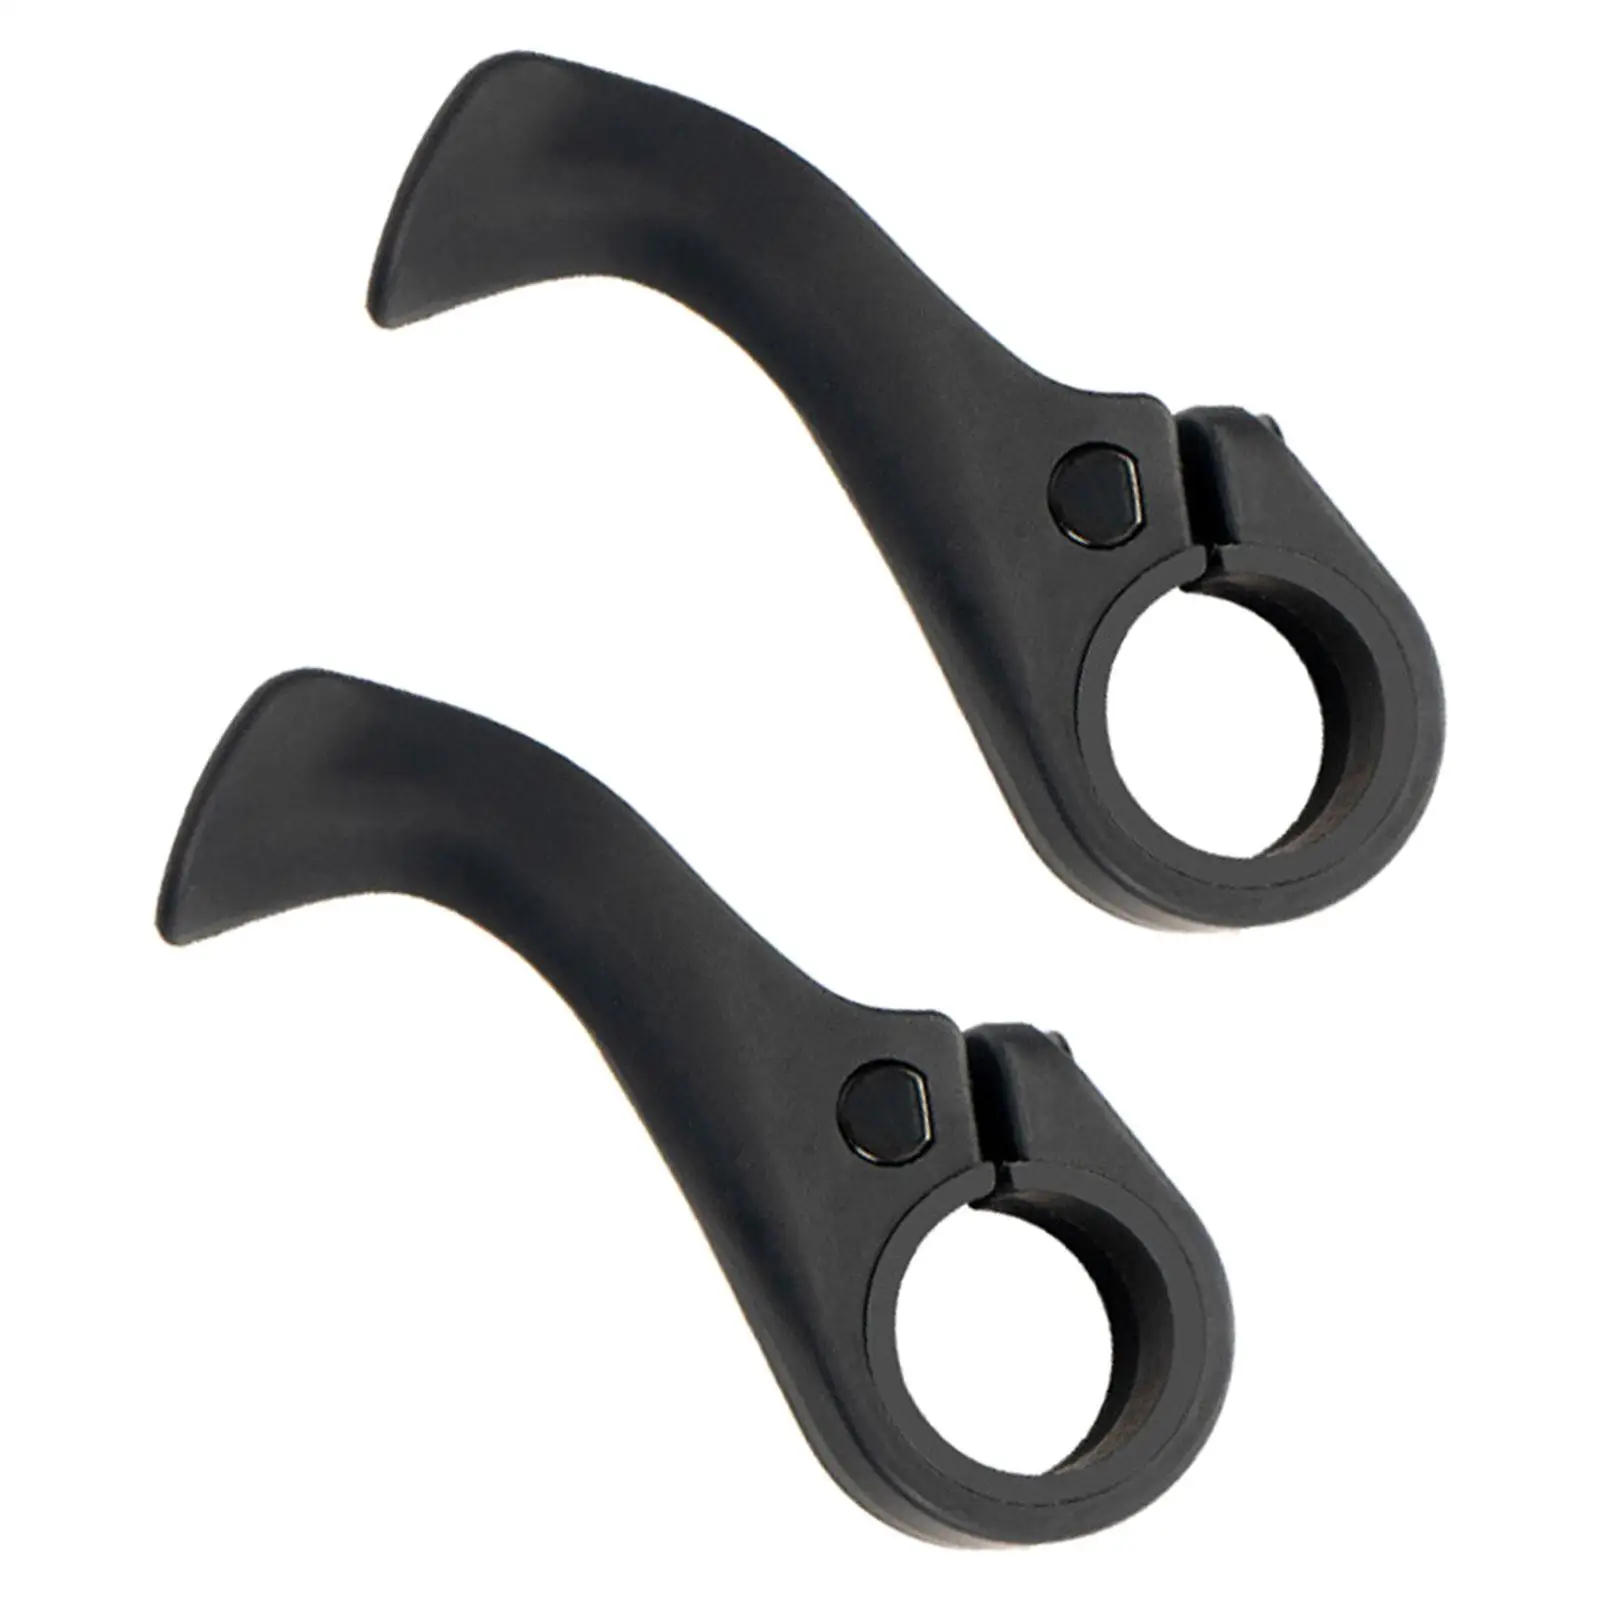 Bicycle Handlebar Ends Thumb Grip Bike Handle Thumb Grips, Durable Bicycling Accessories Bicycle Handle Thumb Force Rest Grip